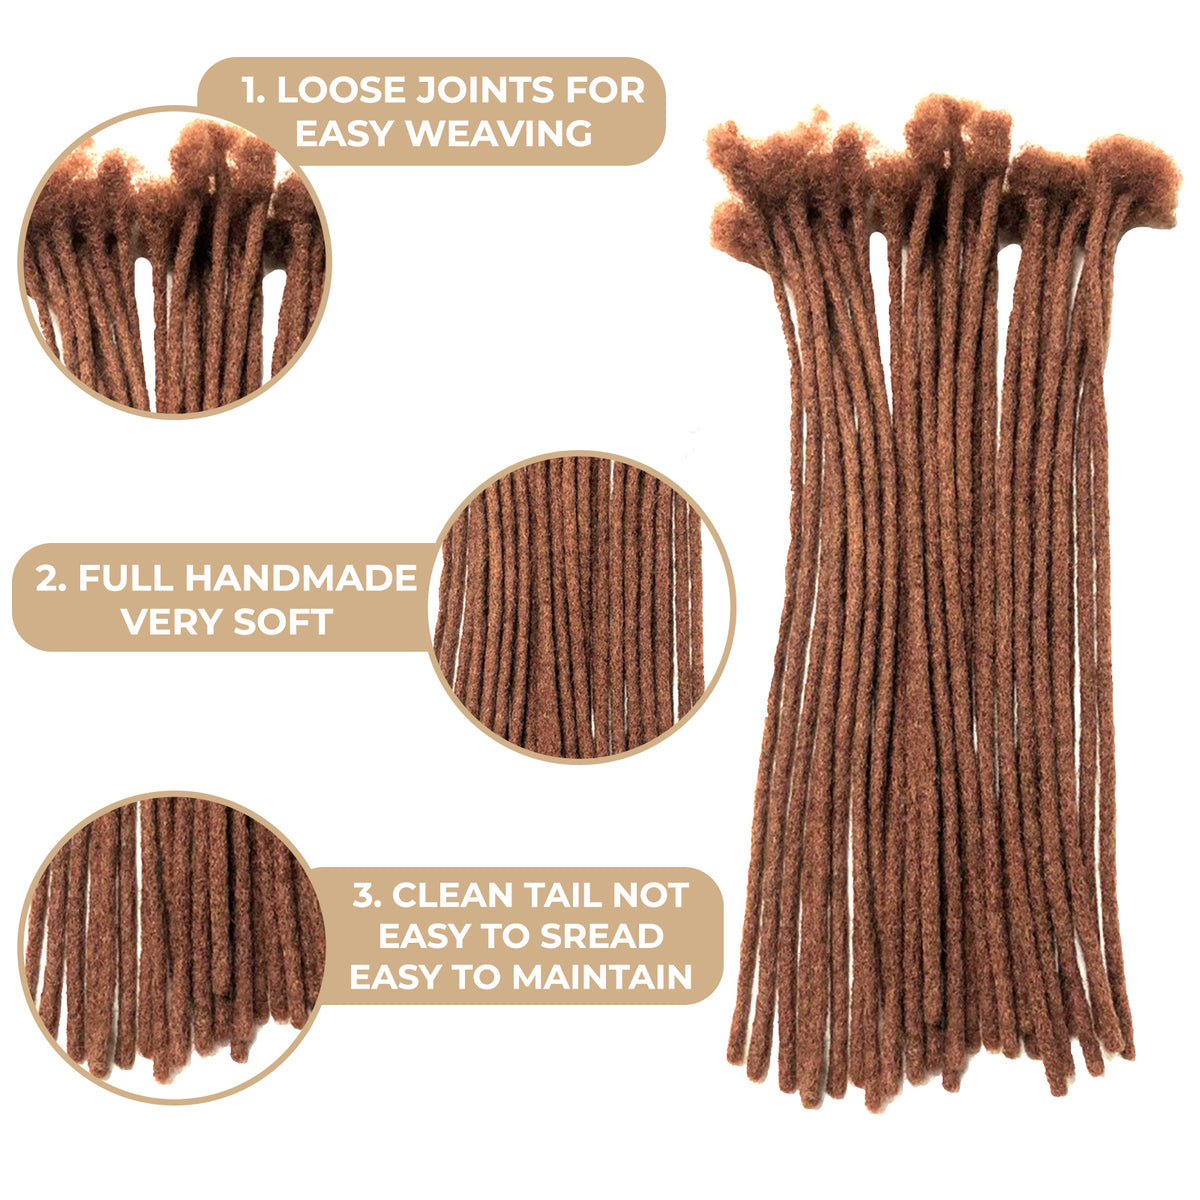 100% Human Hair Dreadlock Extensions 16Inch 10 Strands Handmade Natural Loc Extensions Human Hair Bundle Dreads Extensions For Woman & Men Can Be Dyed/Bleached (Brown/33, 16inch length 0.2 cm Width)